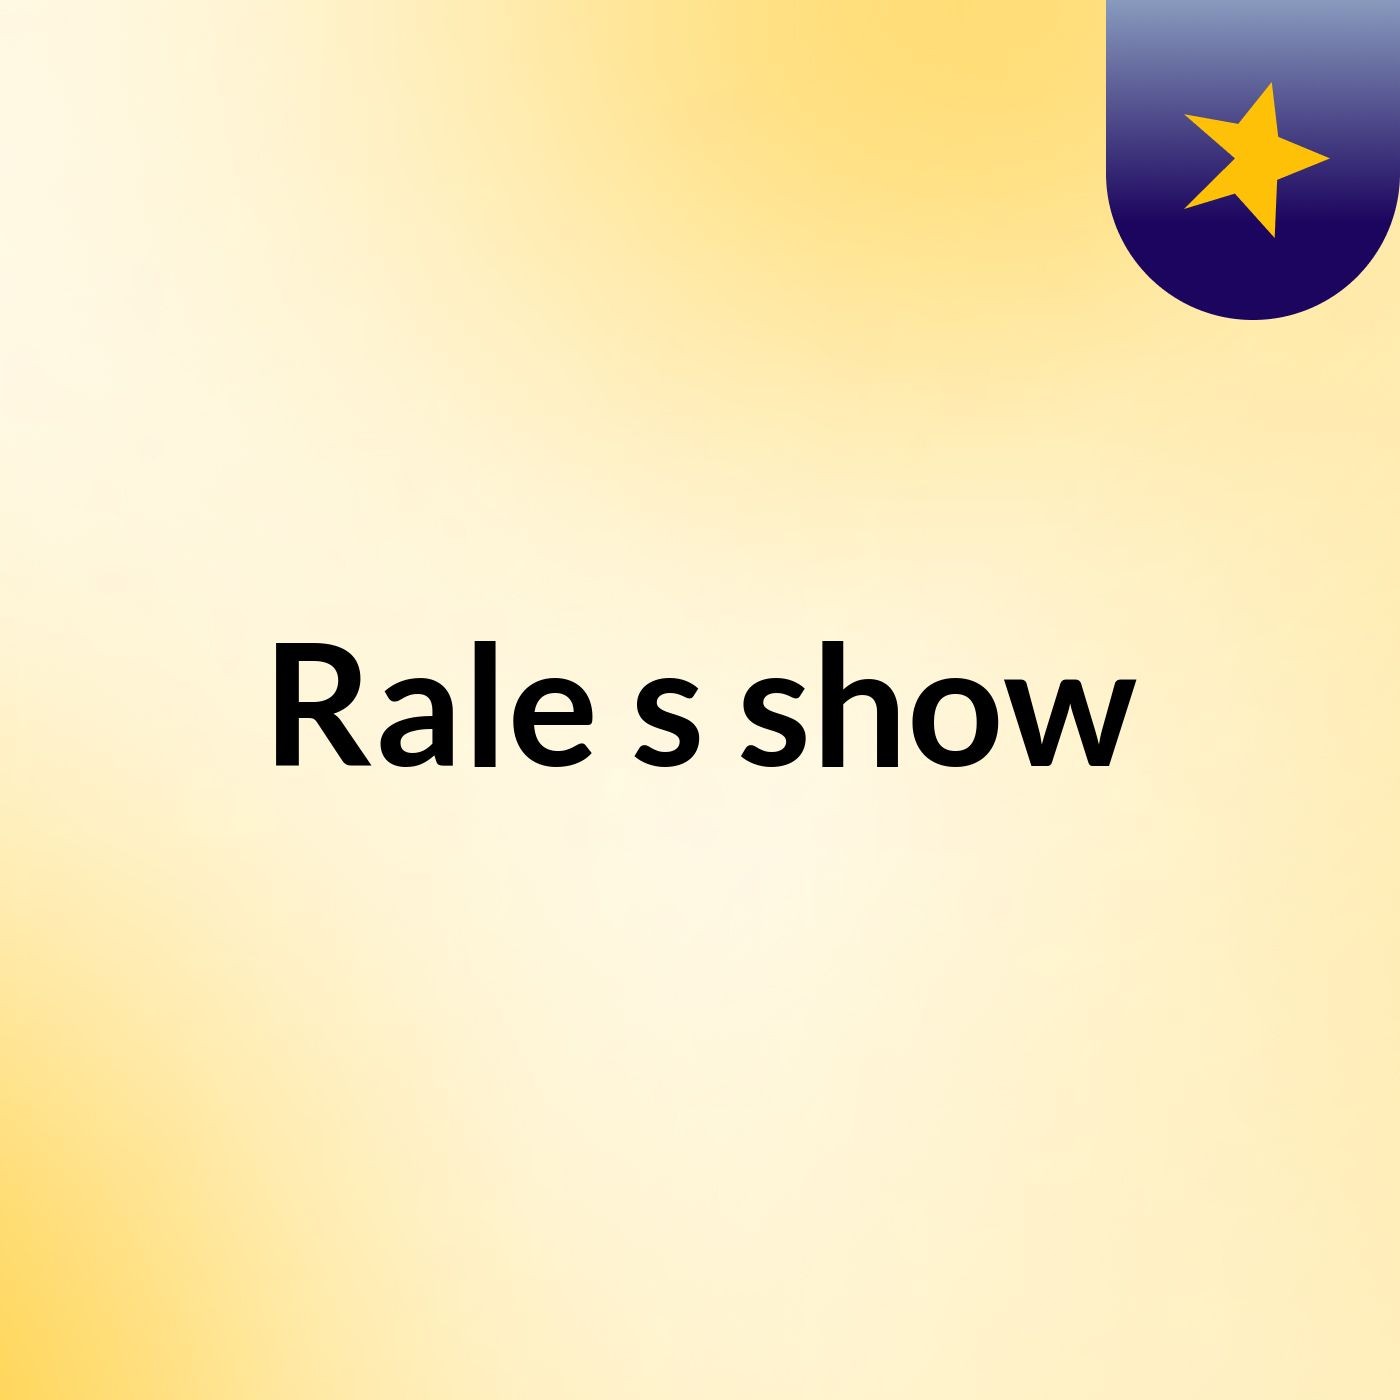 Rale's show